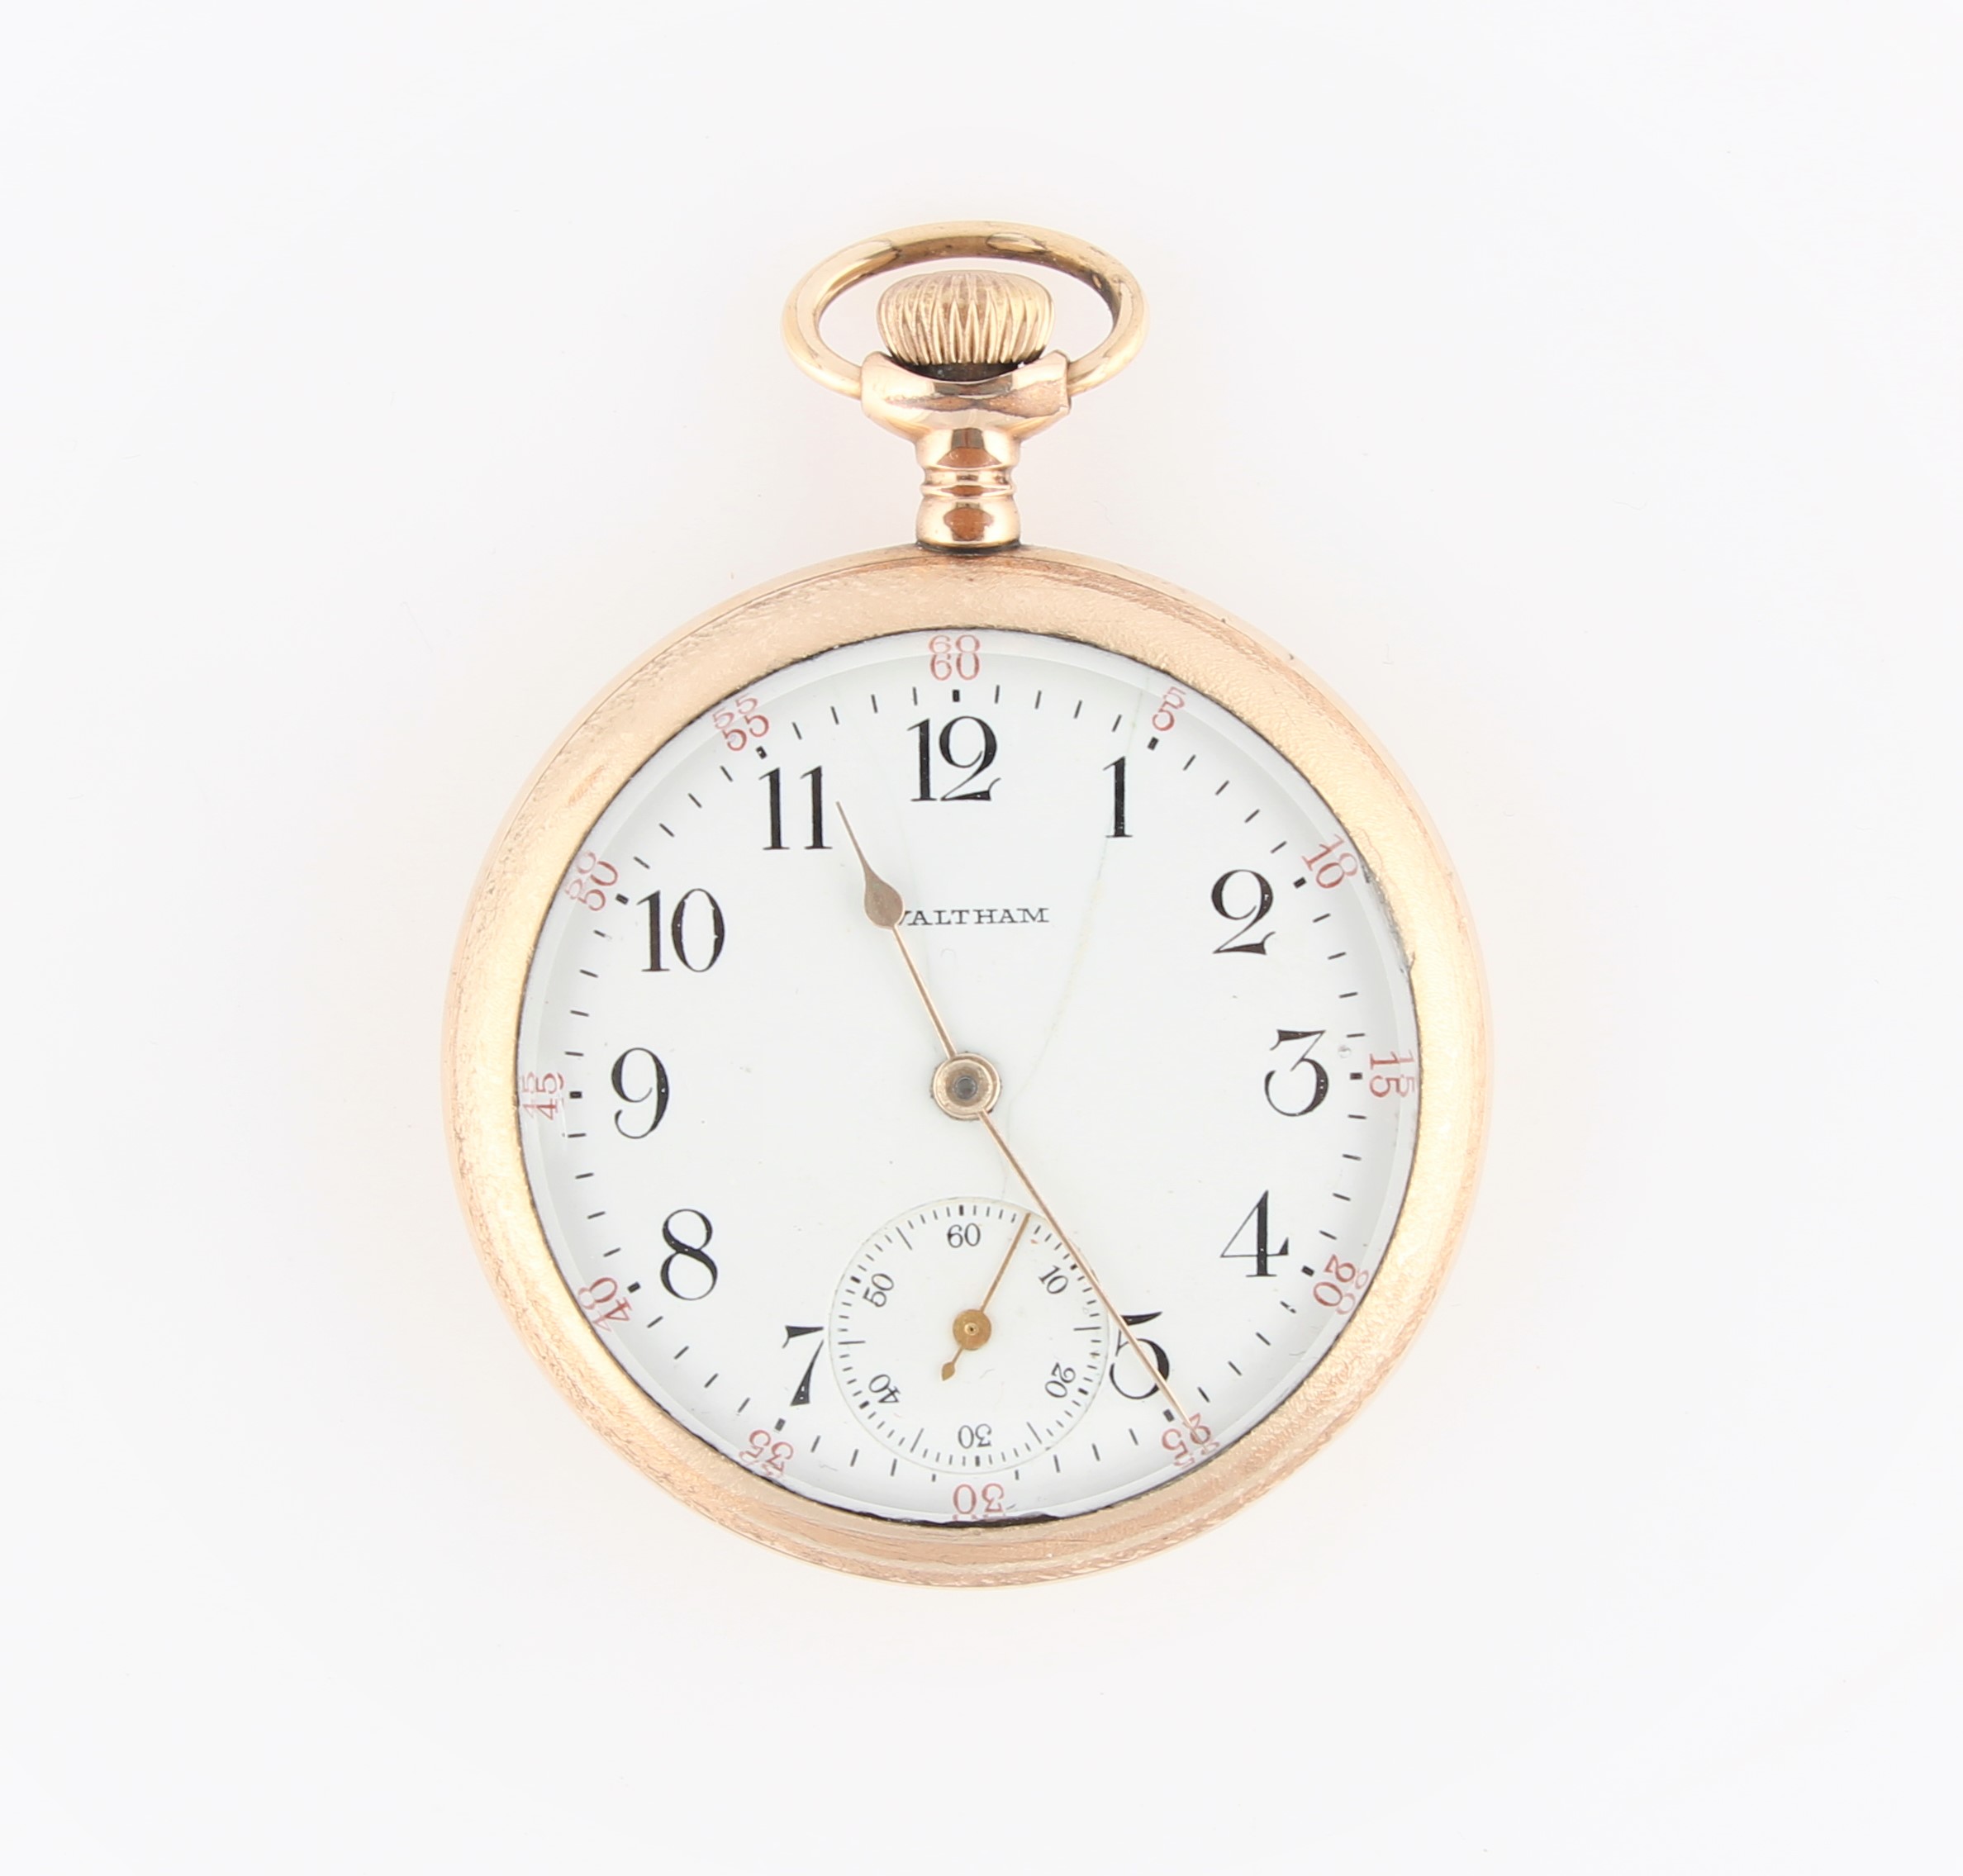 A gold plated Waltham open face crown wind pocket watch, the white enamel dial having hourly